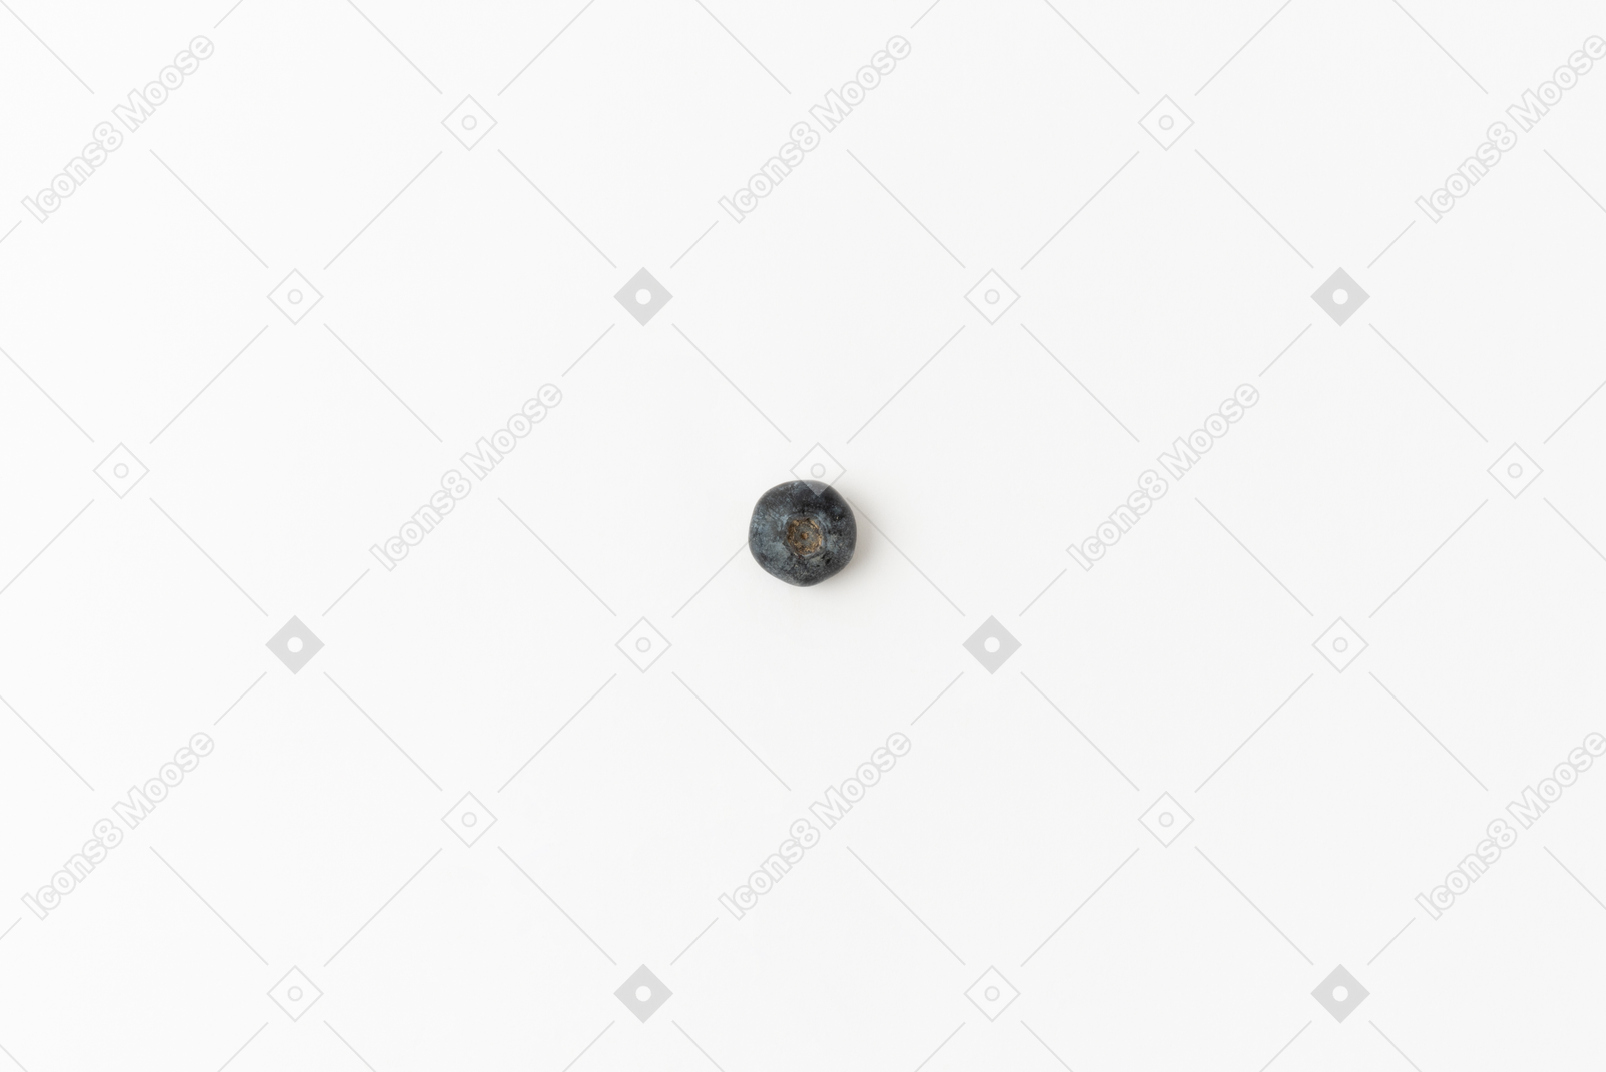 One blueberry on a white background